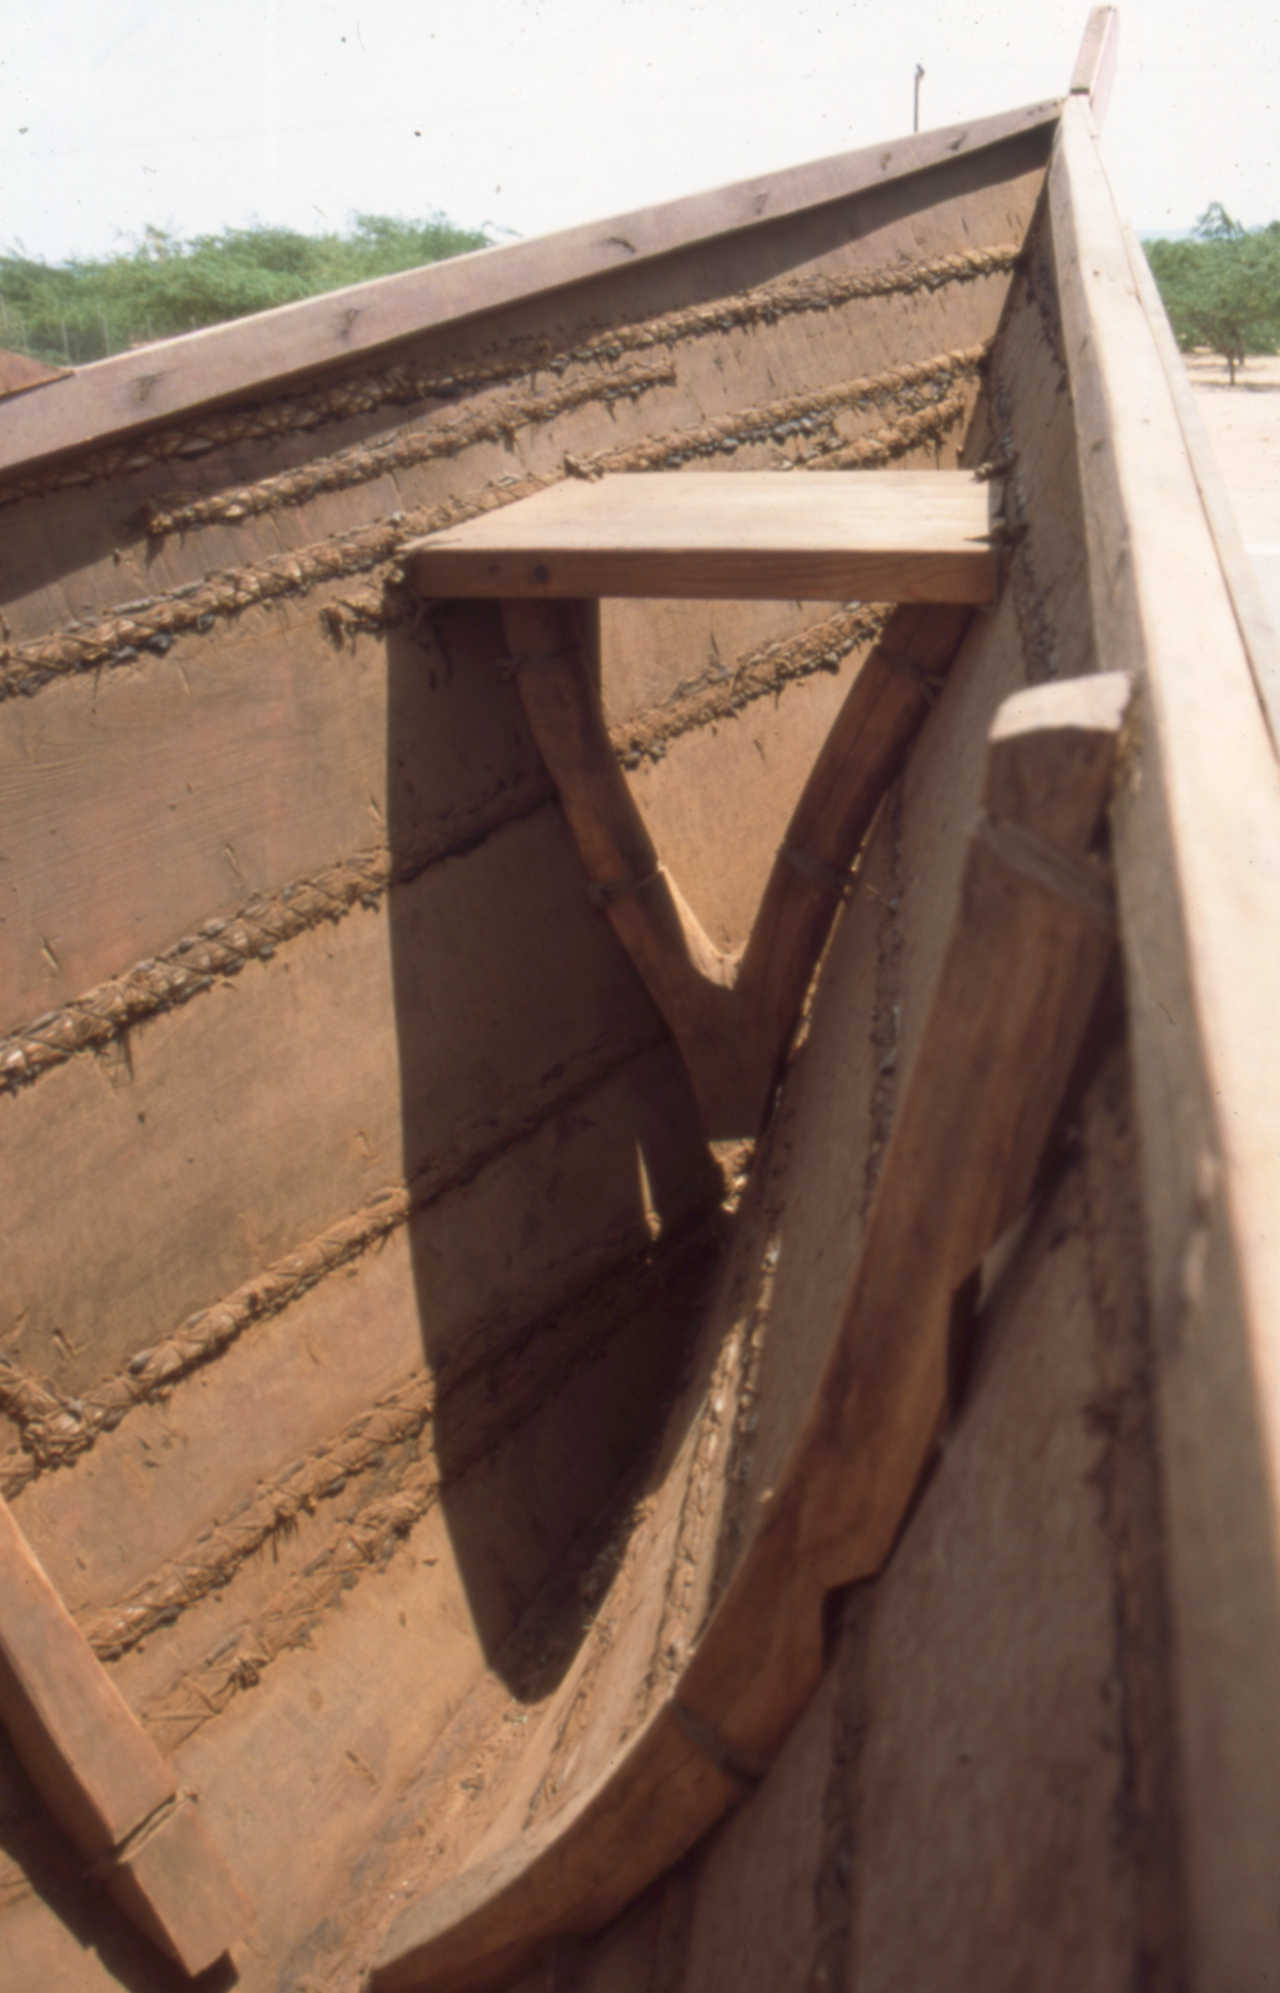 The bow of a small wooden boat